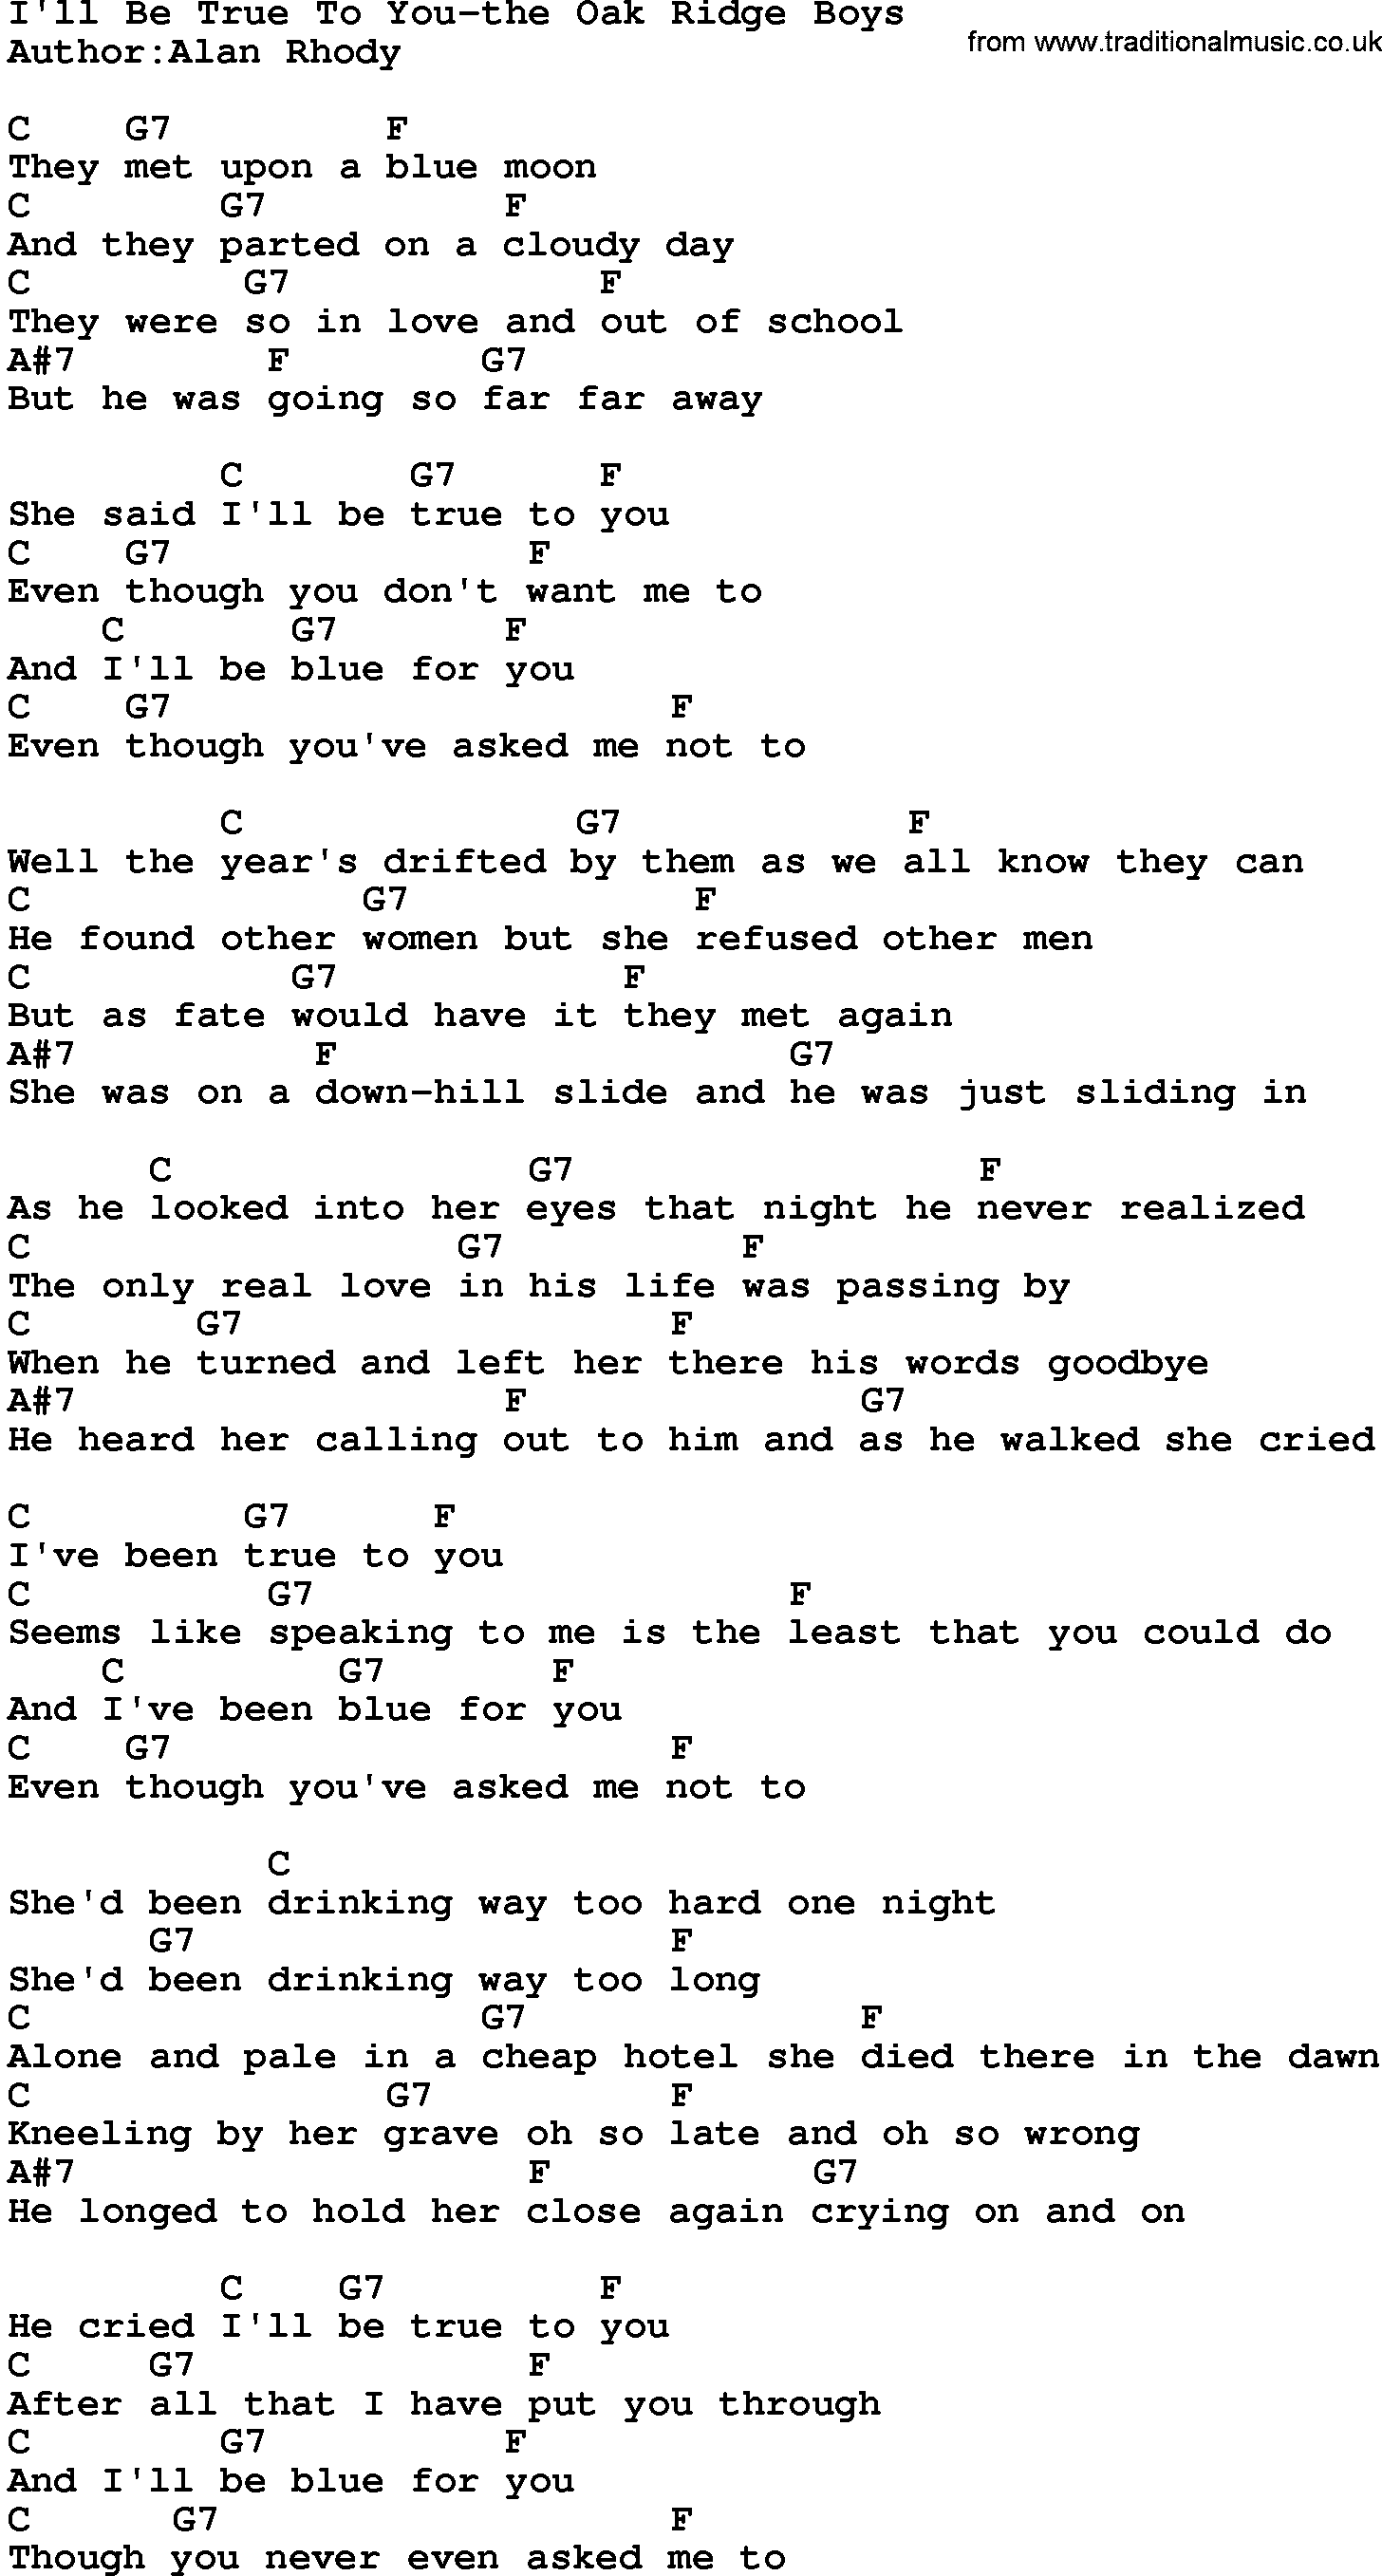 Country music song: I'll Be True To You-The Oak Ridge Boys lyrics and chords